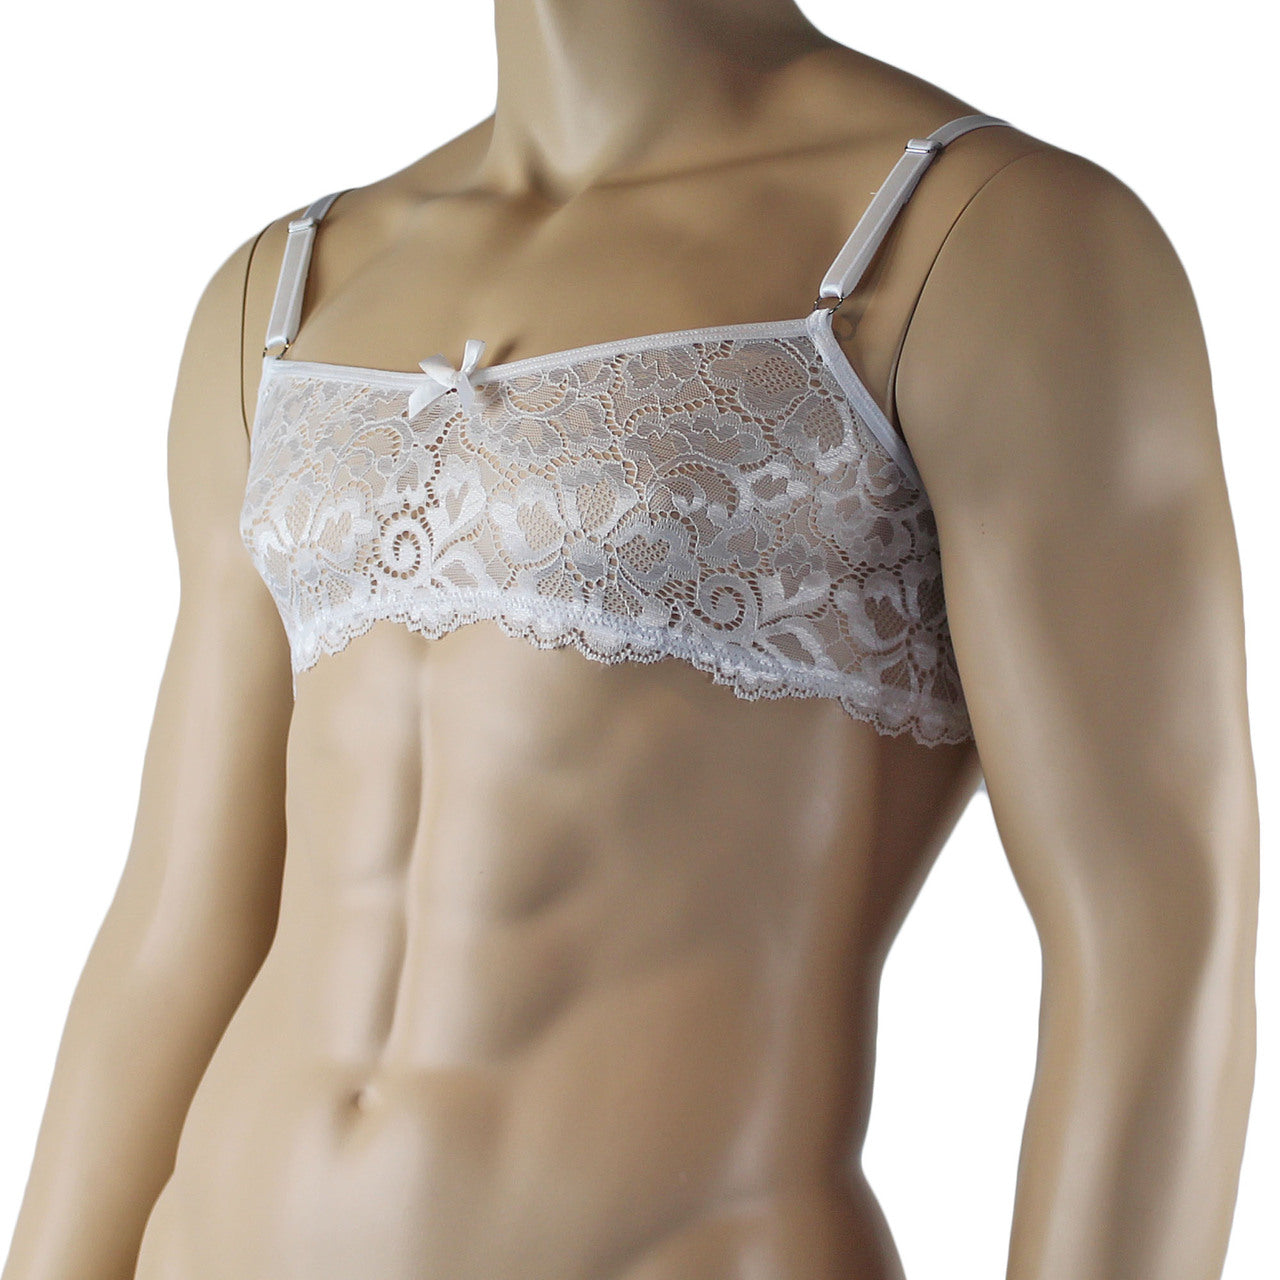 Mens Sweetheart Scalloped Shiny Lace Bra Top for Males (white plus other colours)